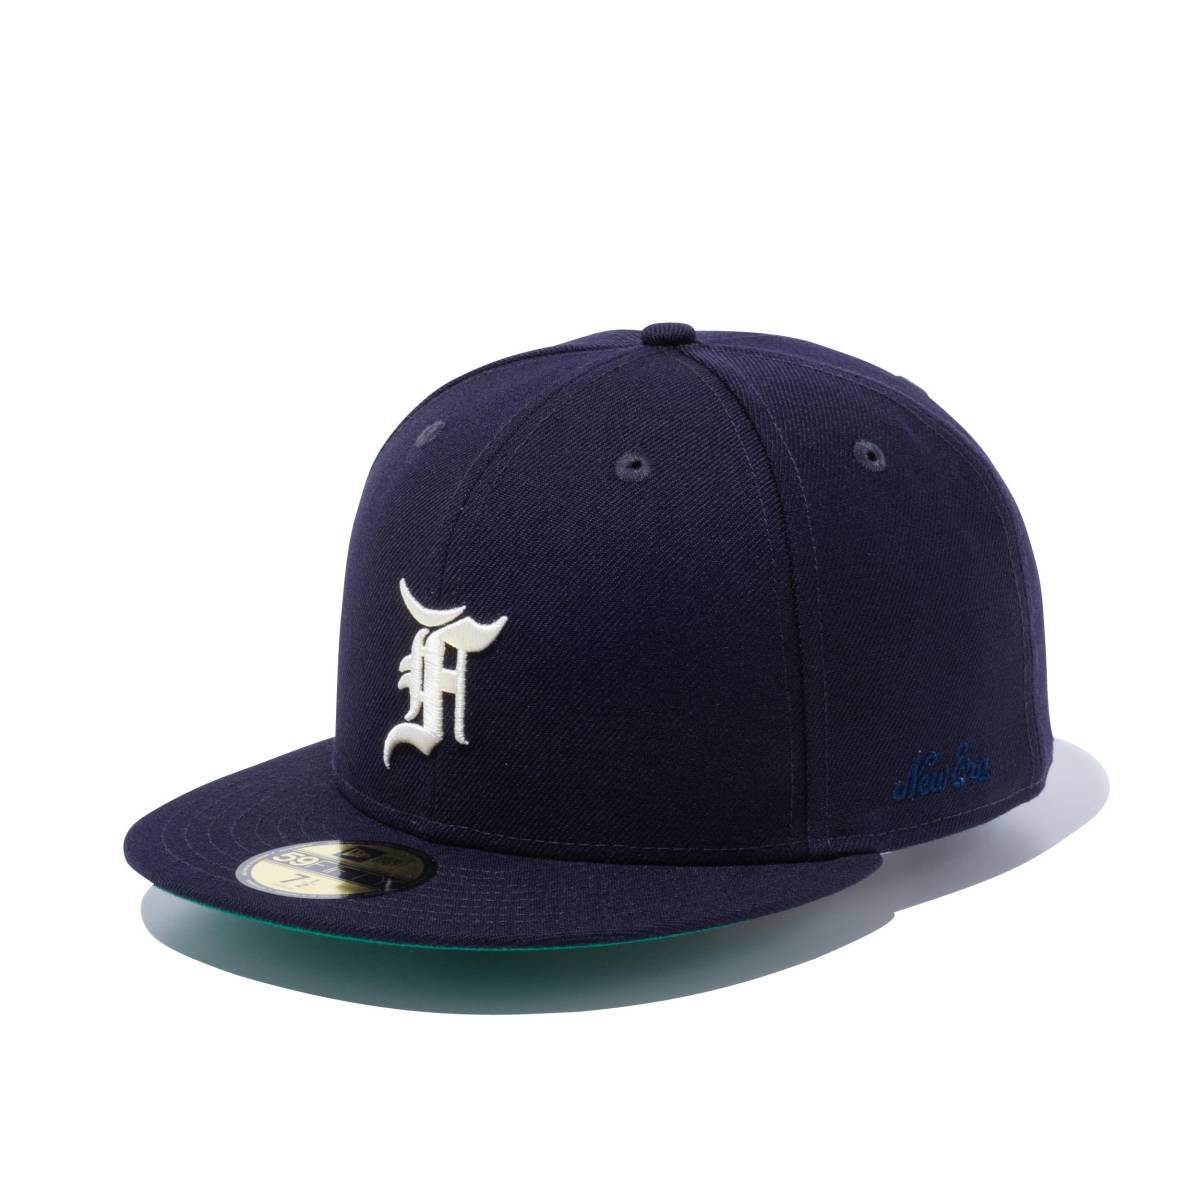 NEW ERA FEAR OF GOD ESSENTIALS 59FIFTY FITTED NAVY 7 1/2キャップ